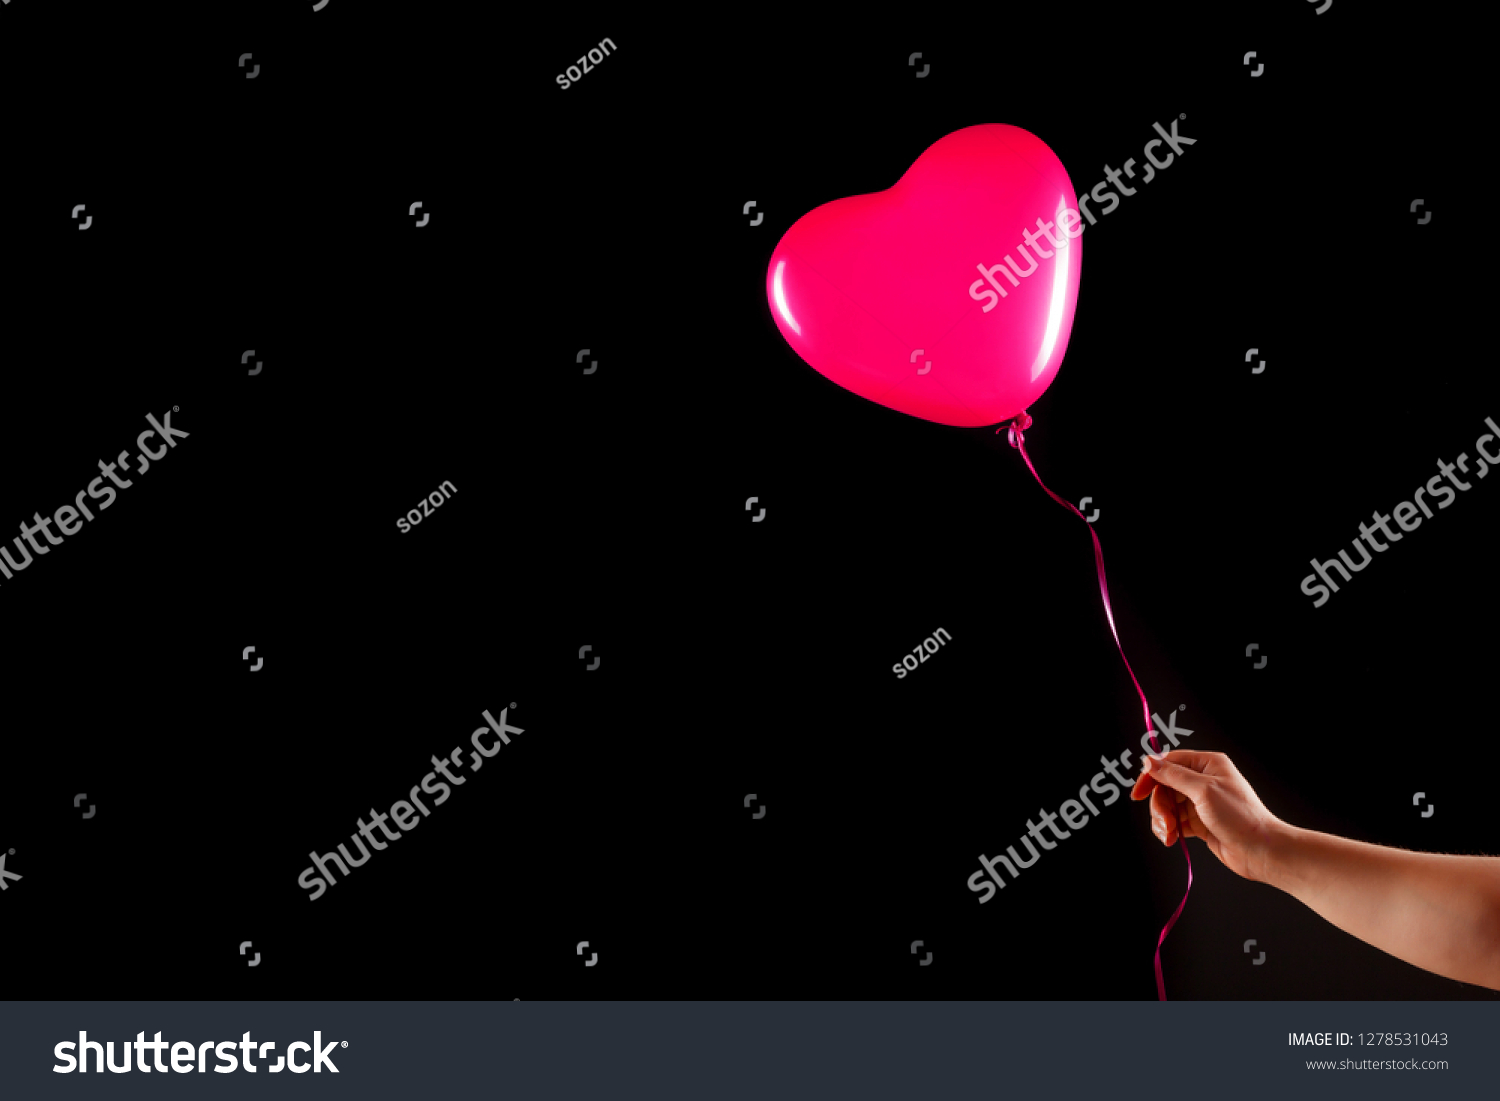 Female hand holds red rubber inflatable heart shape balloon. Love, relationship, valentines day and birthday celebration concept. Studio shot on an abstract blurred background with blank copy space #1278531043